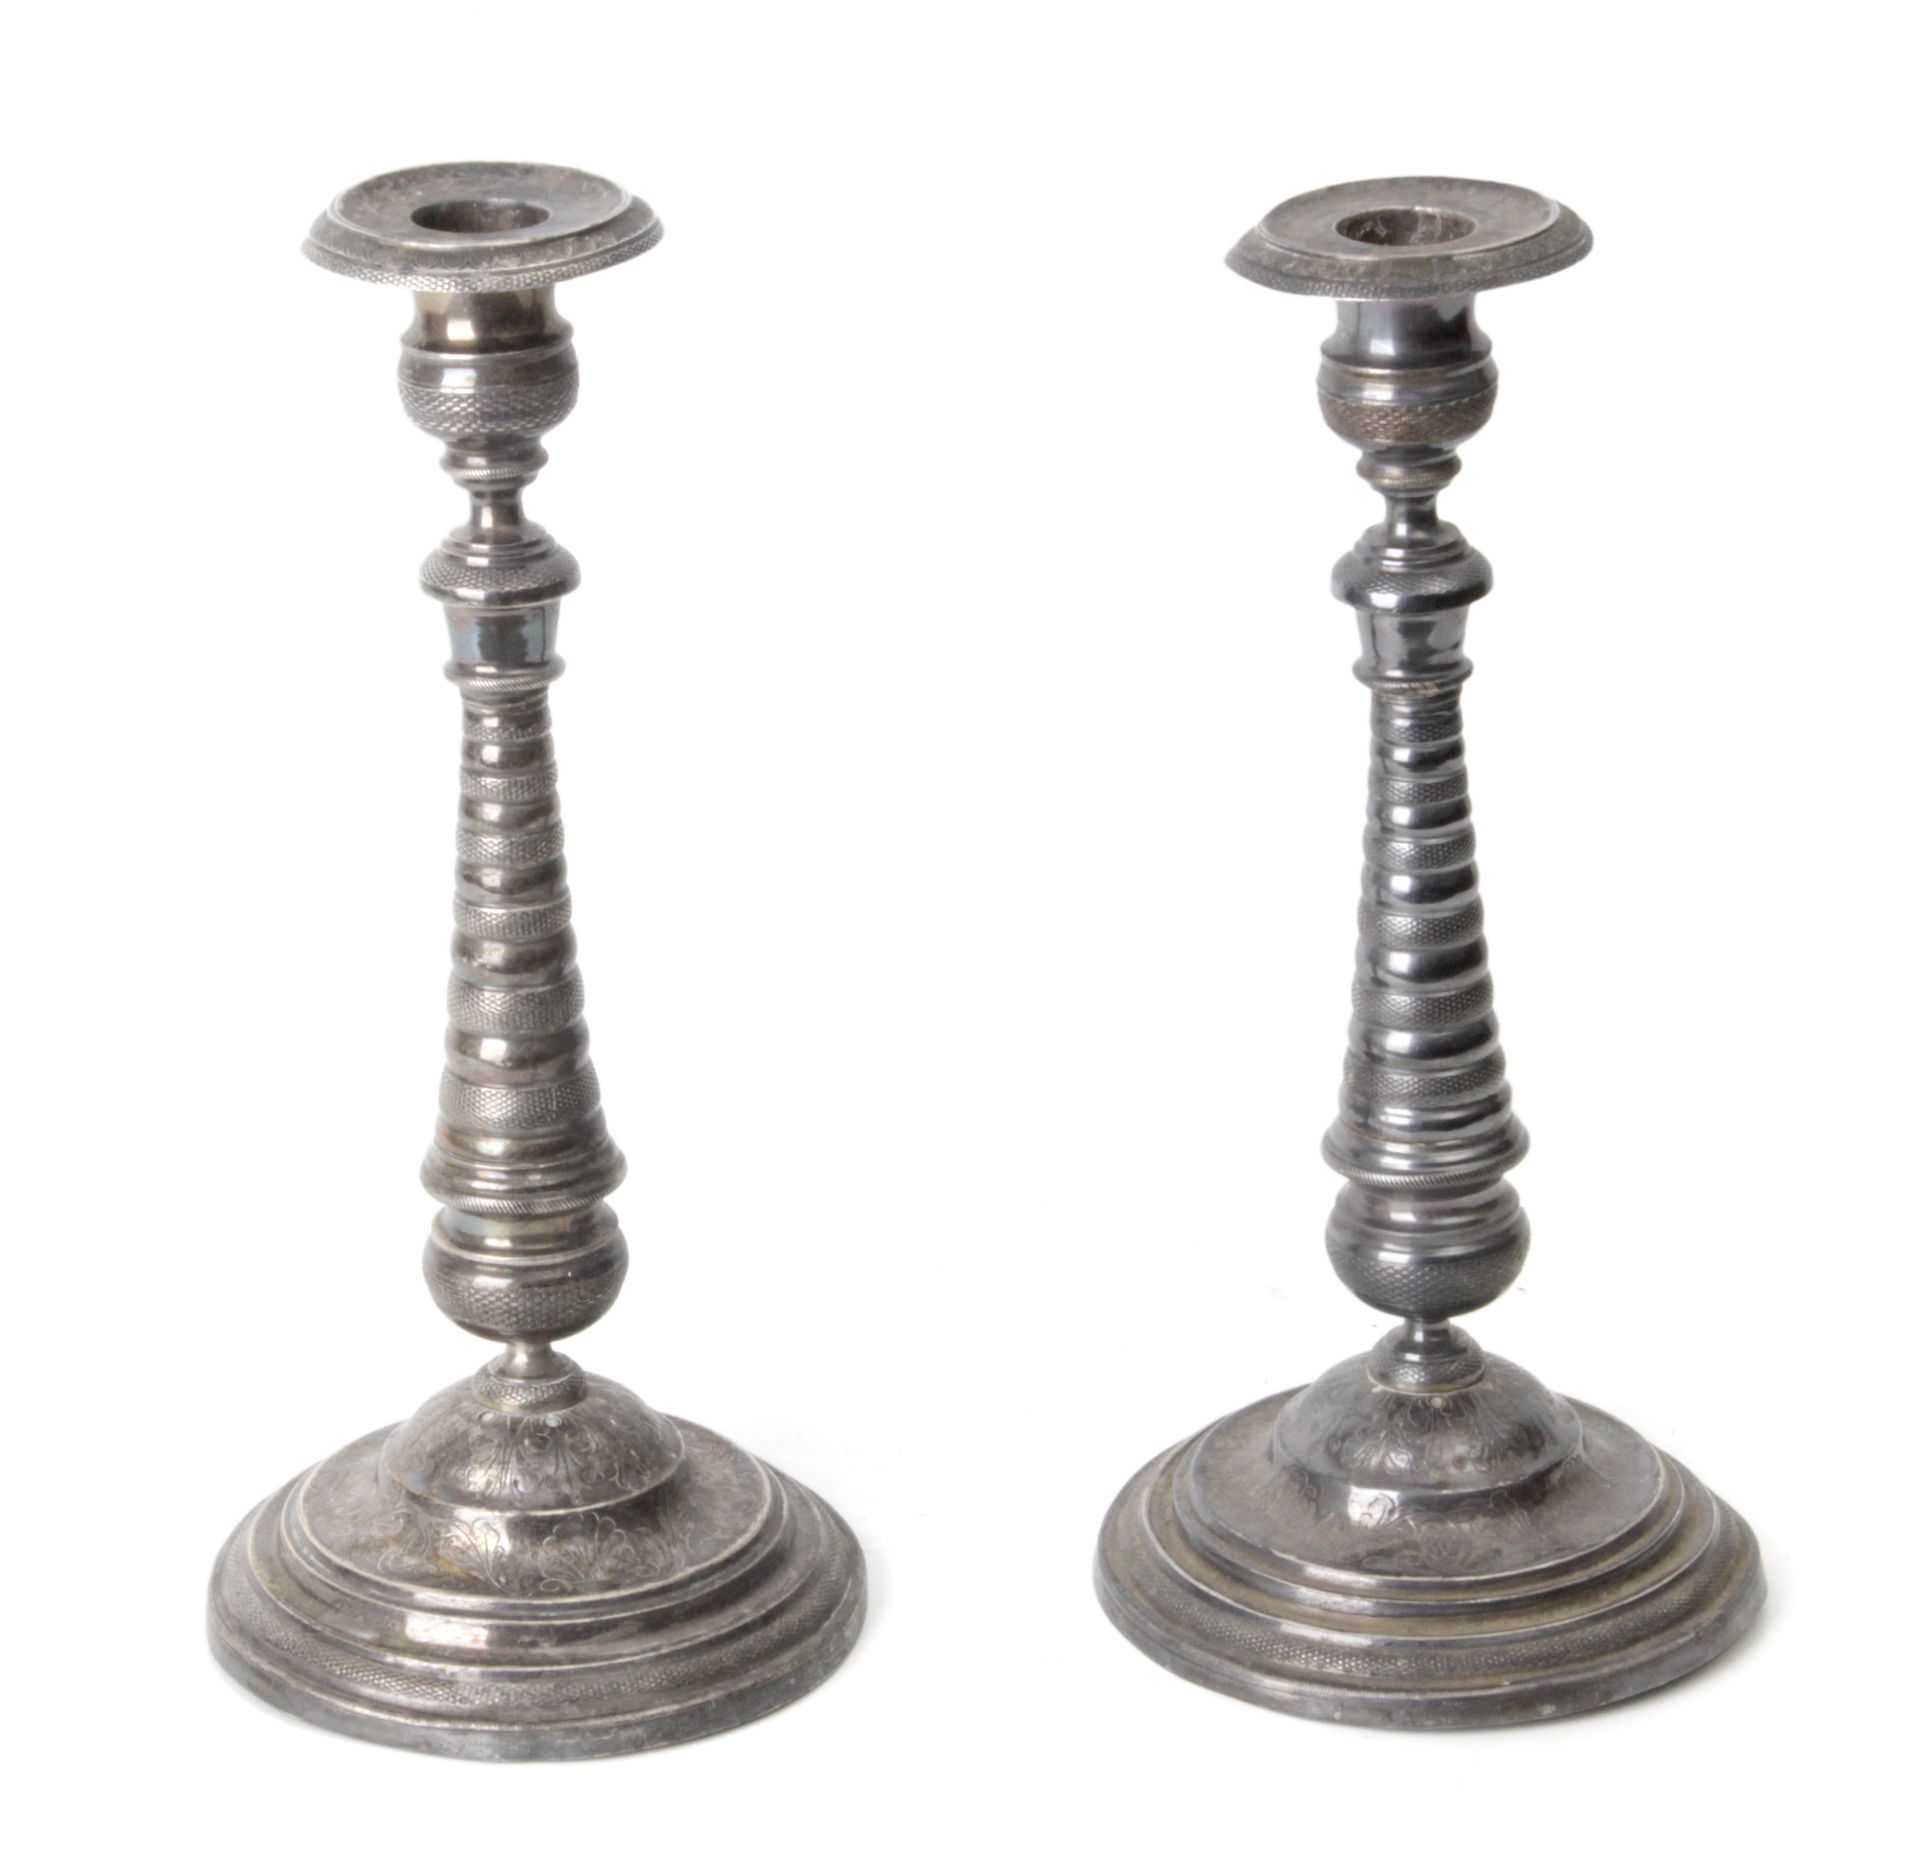 Pair of 19th century silver candlesticks from Barcelona with F. Carreras silversmith hallmarks